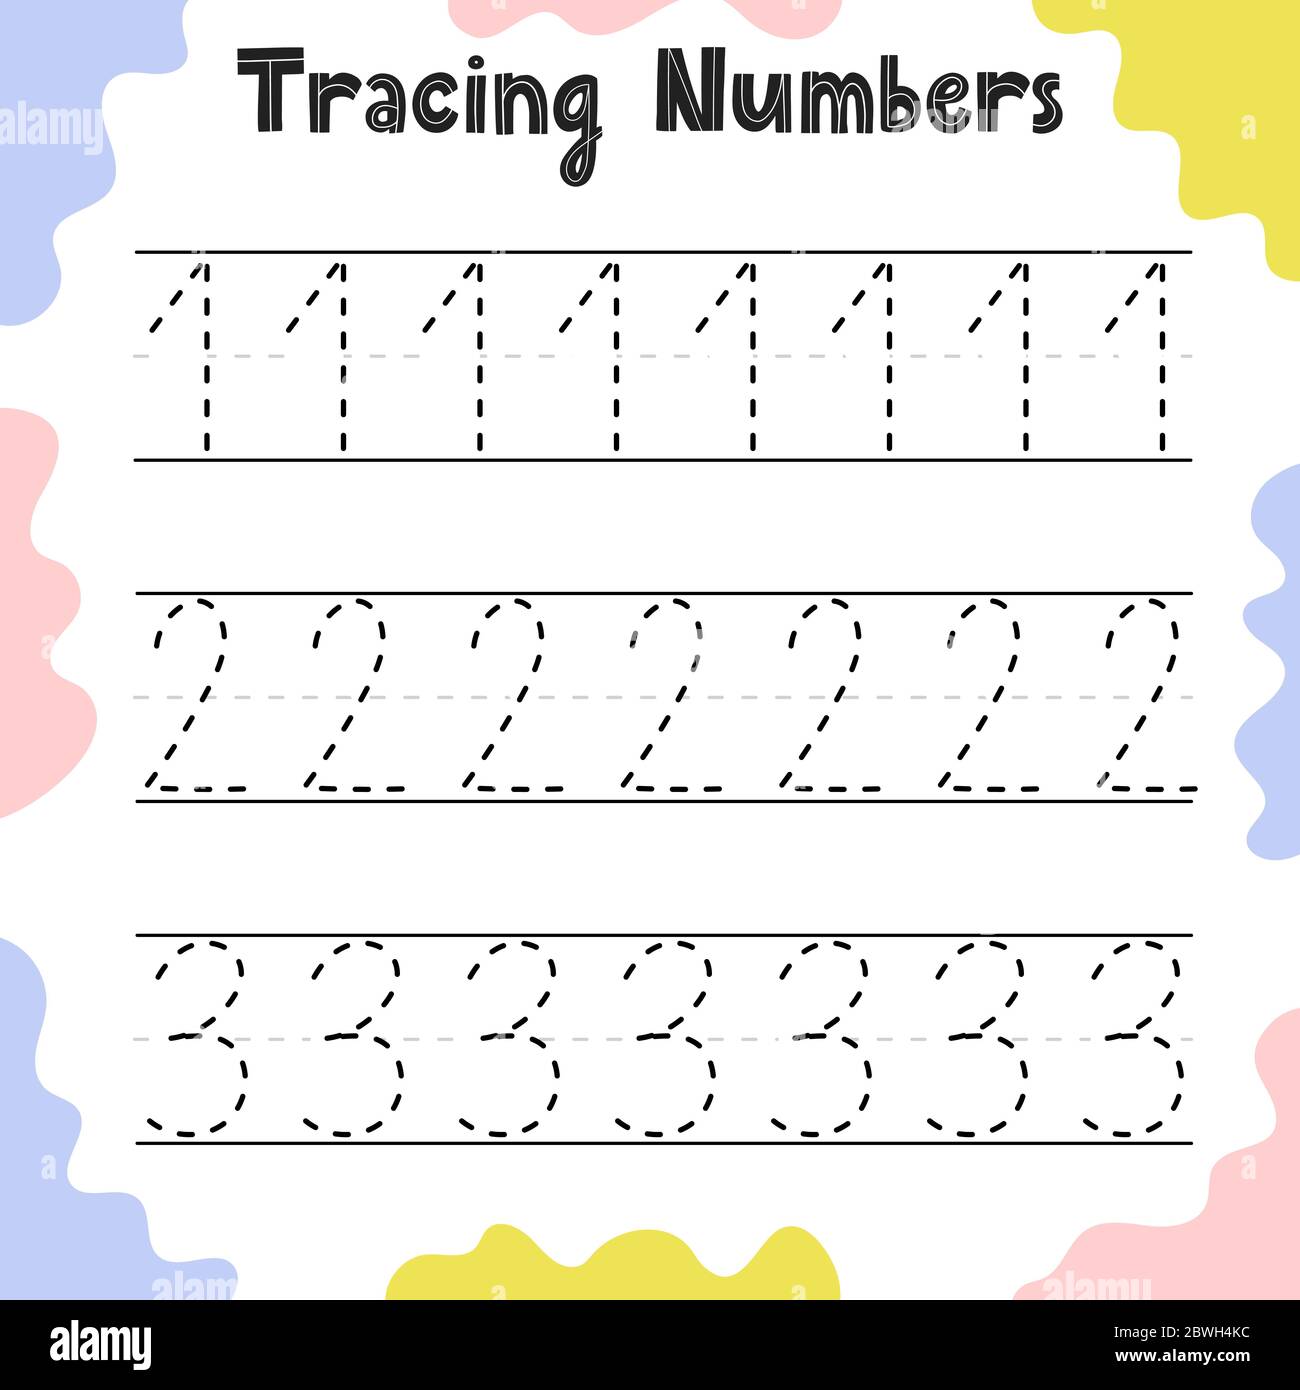 Number1 3 number2 33 word поросенка. 1 2 3 4 For Kids Tracing Worksheet. Numbers Tracing Worksheet for Kids. Tracing numbers 0 1 2 3. Number 1-3 Worksheet.